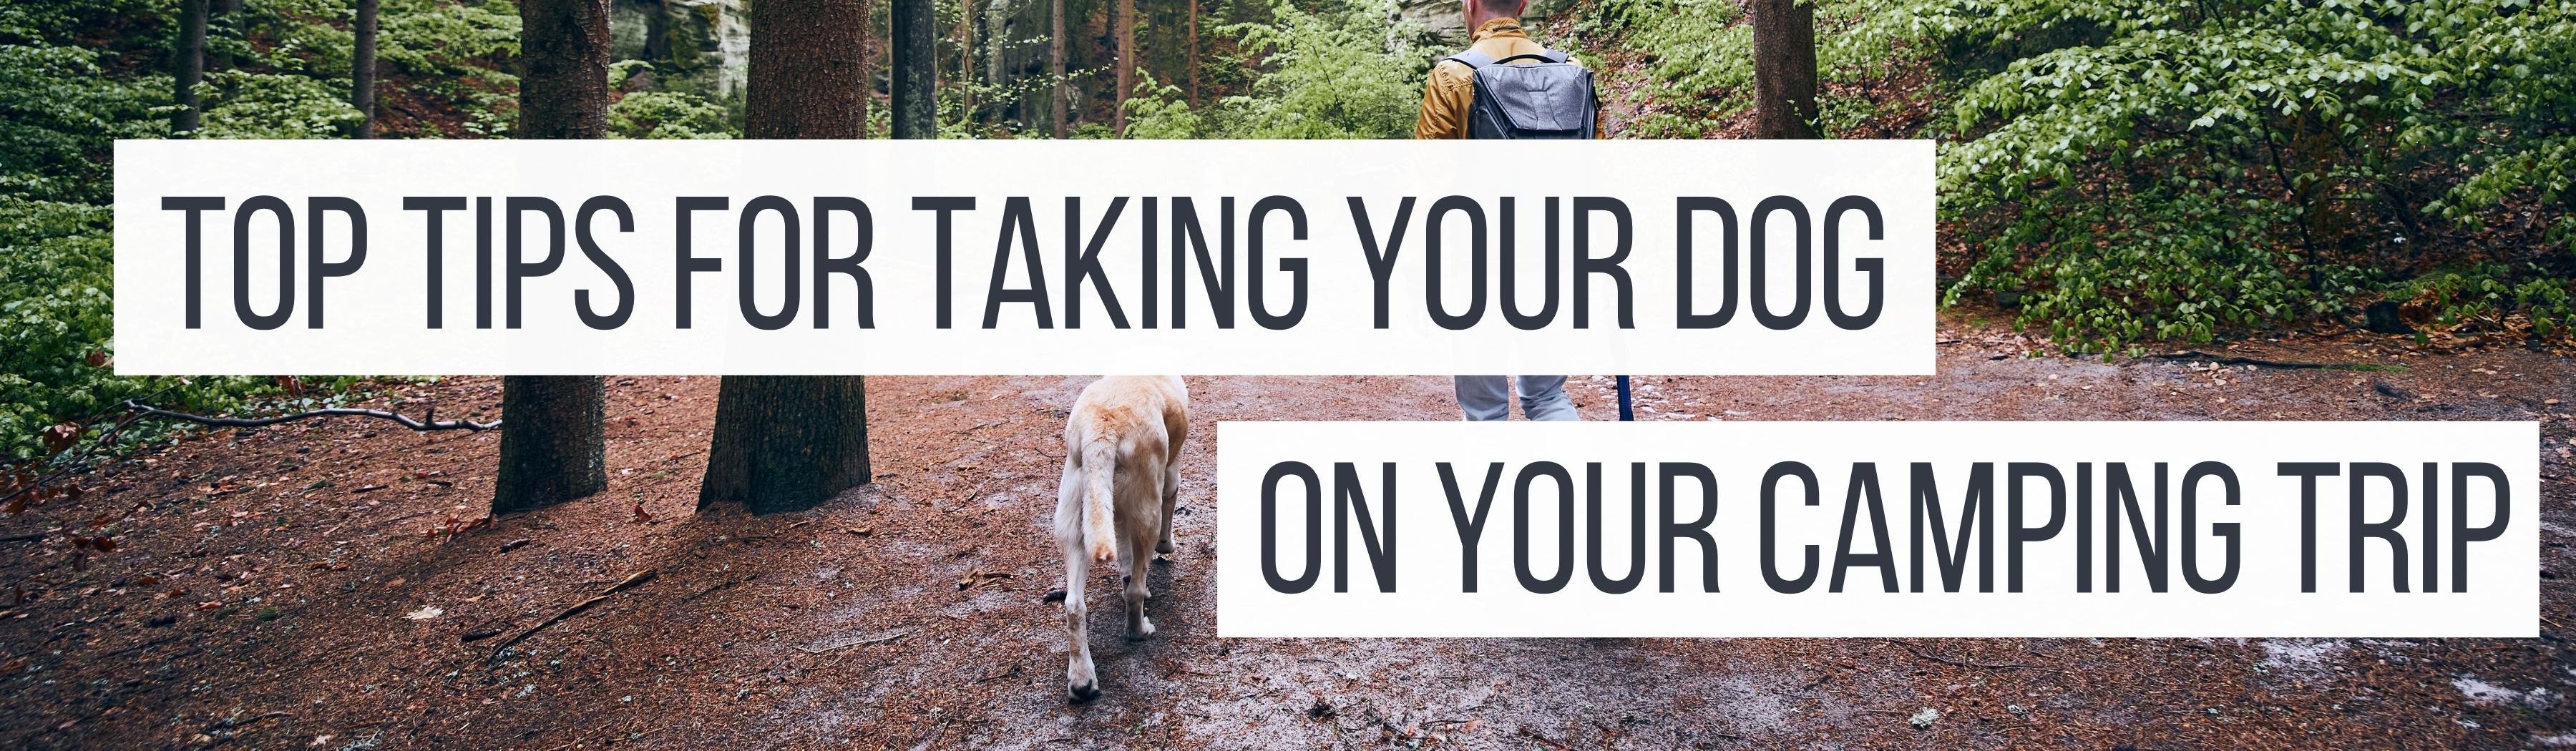 A man walking his dog through a woodland area. Top Tips For Taking Your Dog On Your Camping Trip by Webbs.